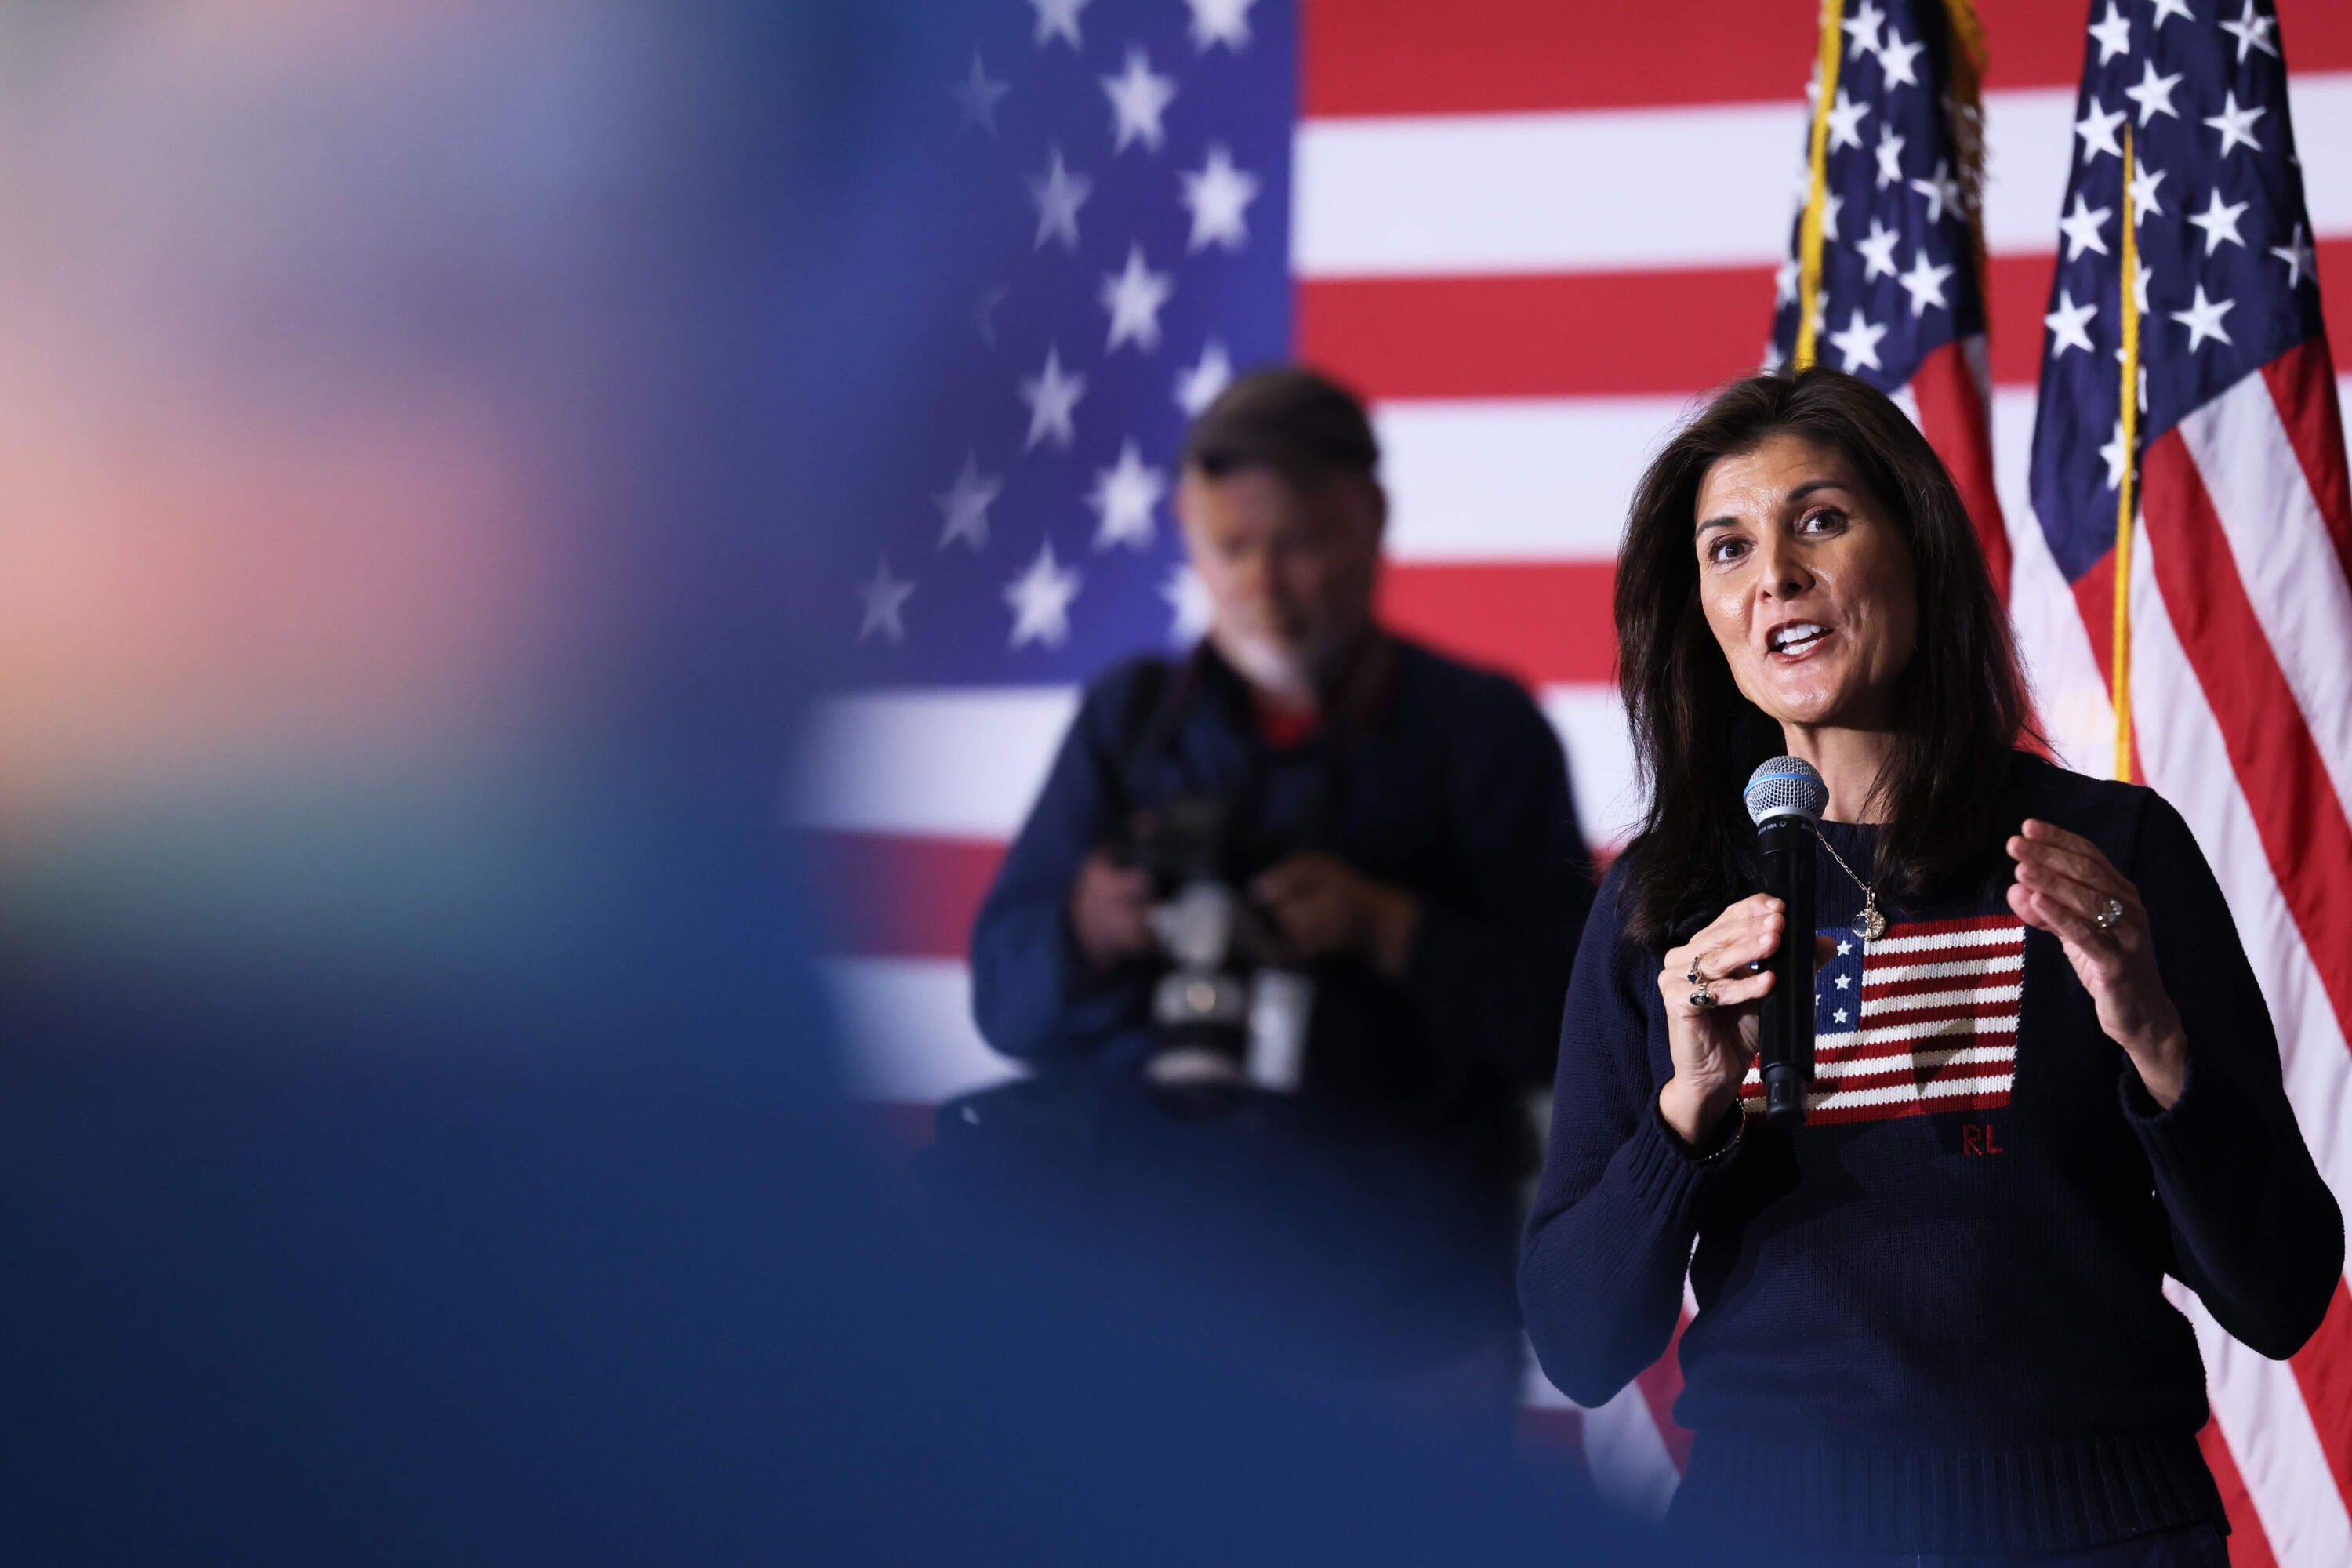 Republican presidential candidate and former U.N. Ambassador Nikki Haley speaks during a town hall at Rochester American Legion Post #7 on Oct. 12 in New Hampshire. (Michael M. Santiago/Getty Images)